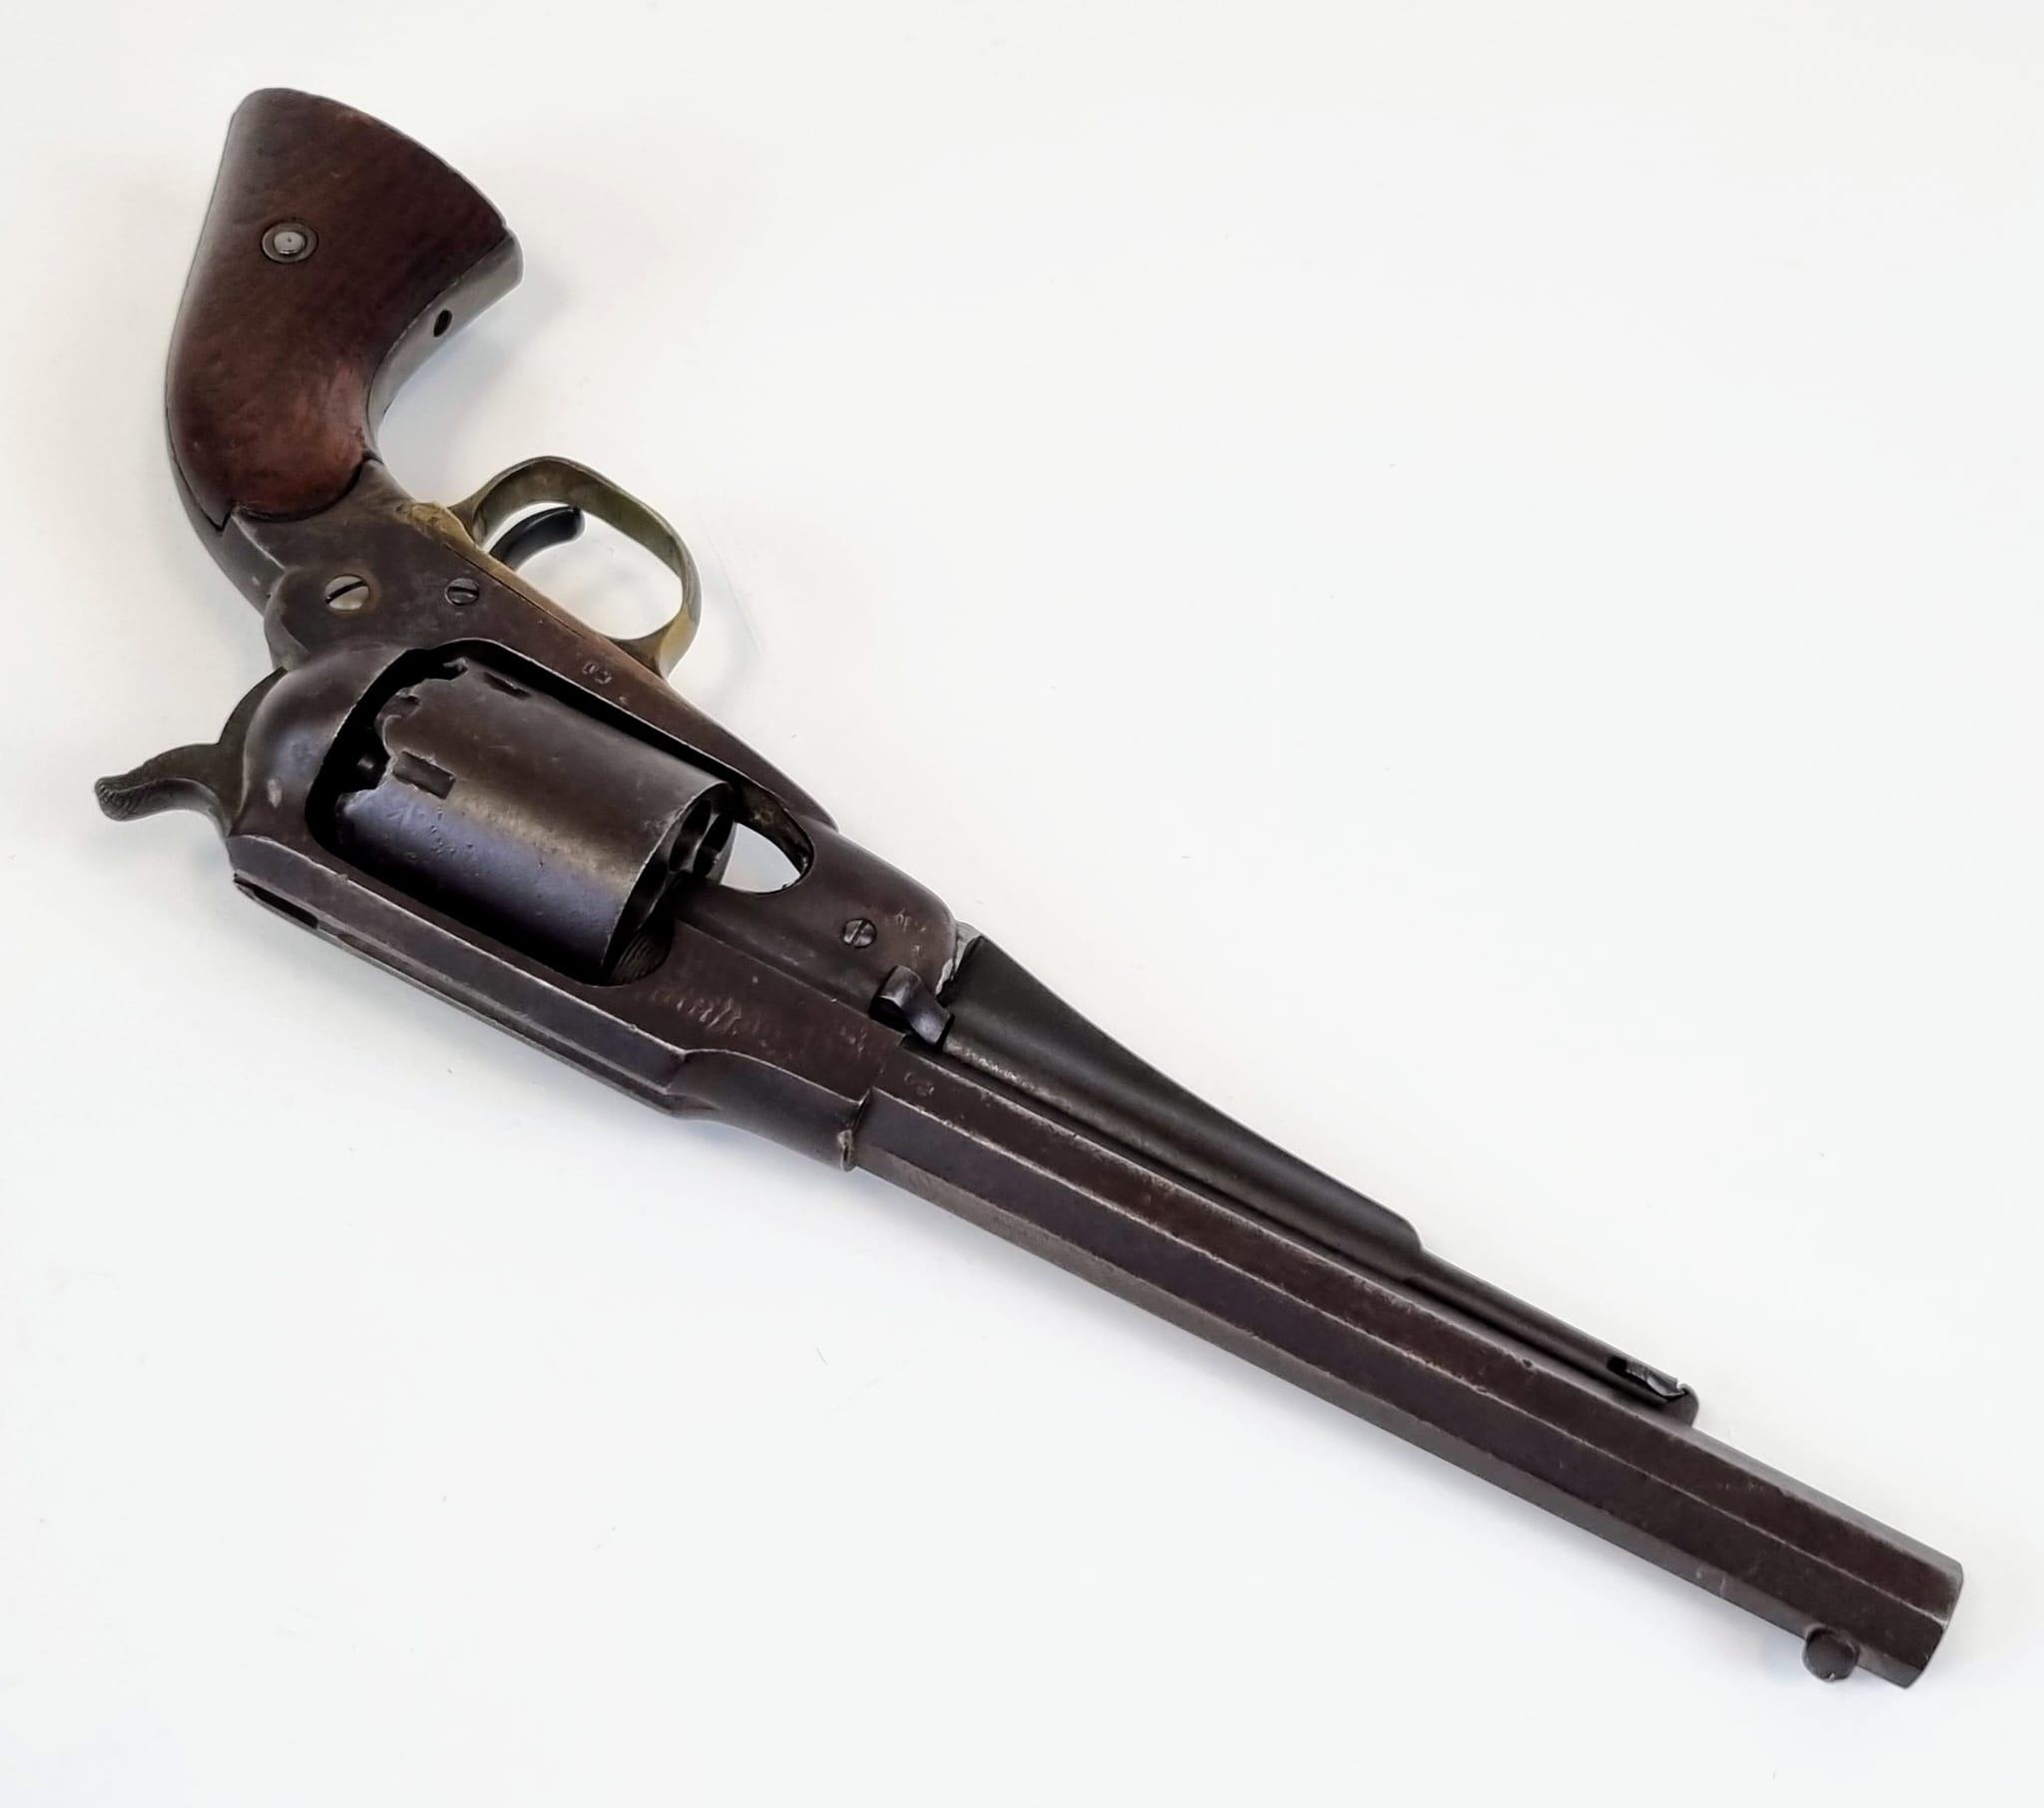 A Black Powder Remington Model 1858 Old Army Revolver. This .44 calibre pistol was manufactured in - Image 5 of 13